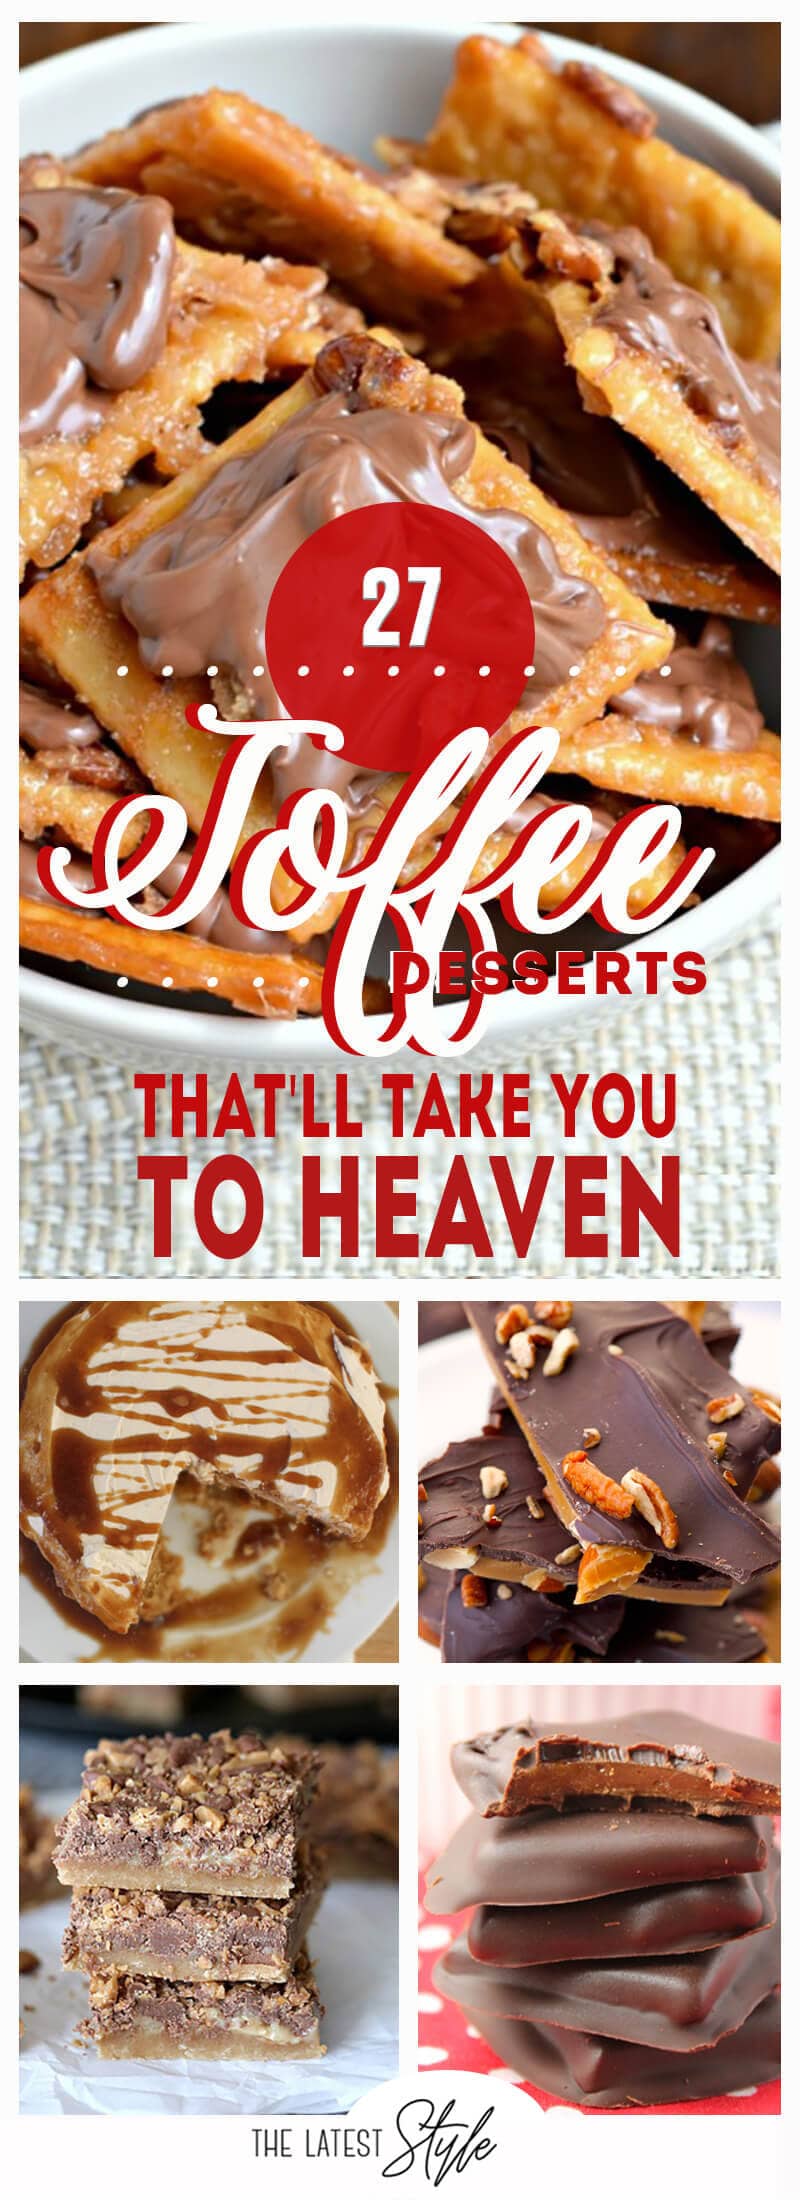 27 Toffee Dessert Recipes that will Take You to Heaven